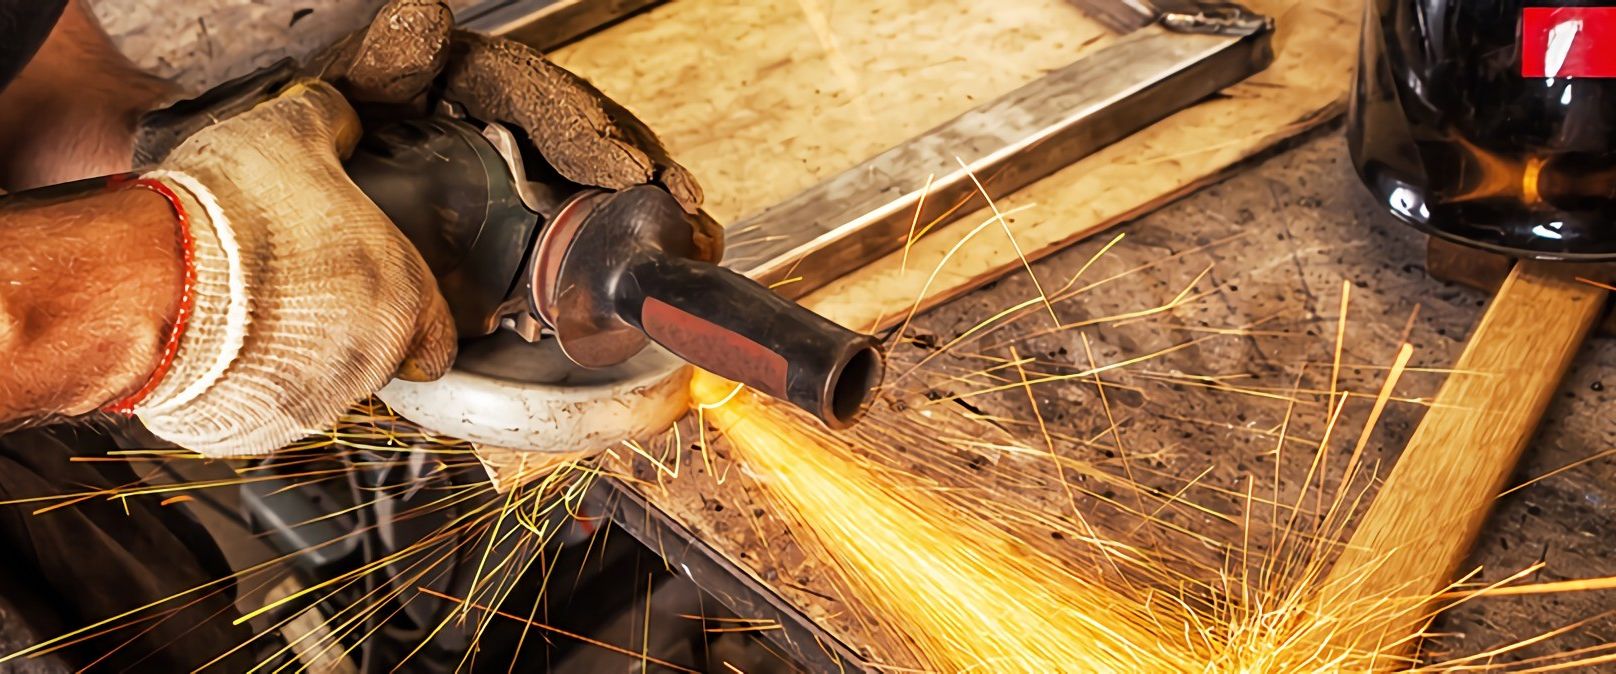 What Is an Angle Grinder in Welding, and How Is It Used? - Tulsa Welding  School